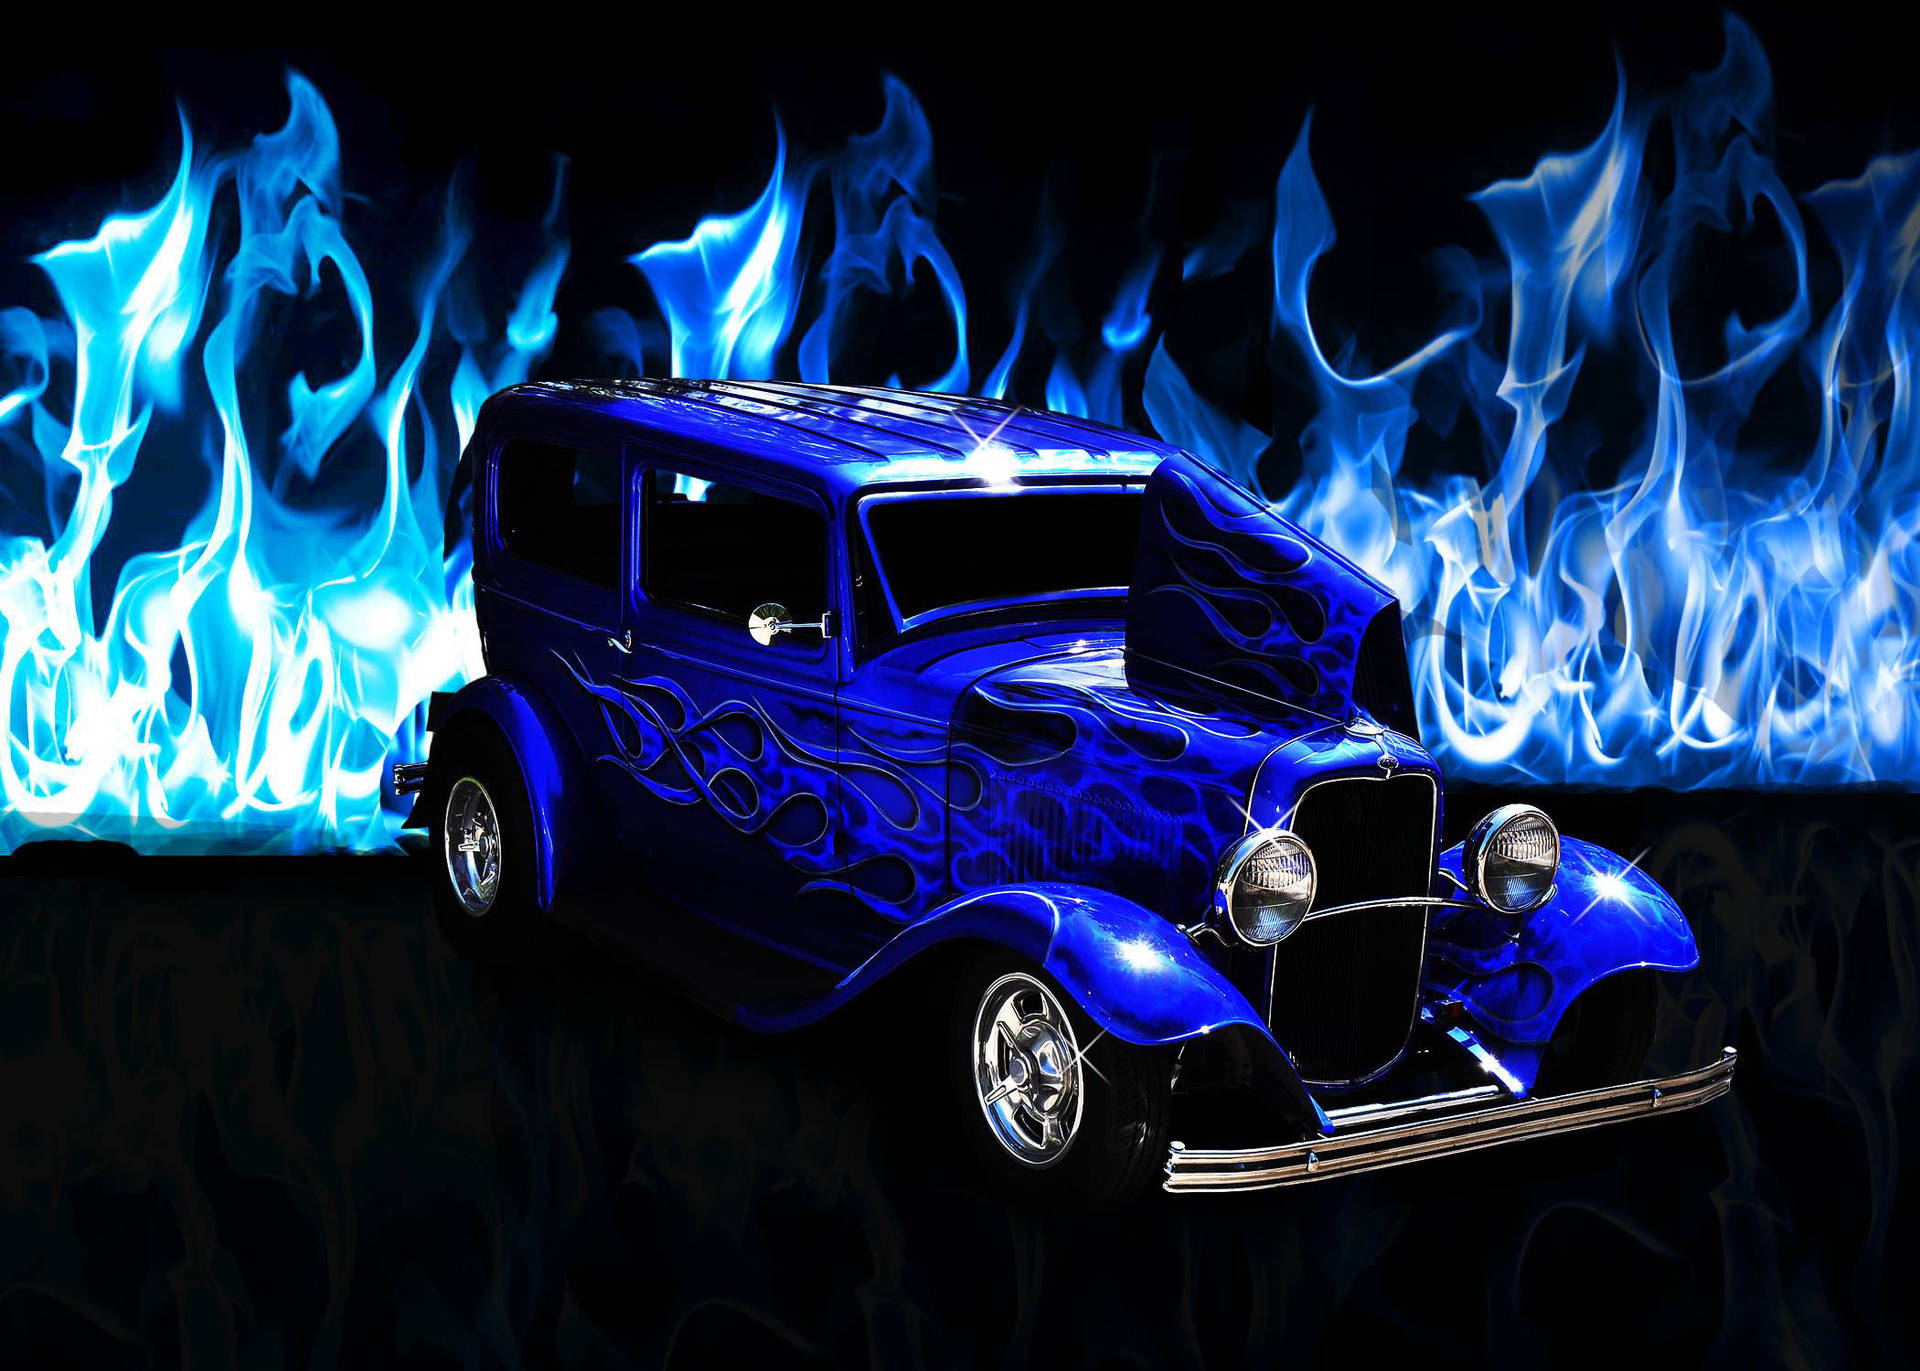 Vibrant Blue Flames Engulfing A Vintage Ford